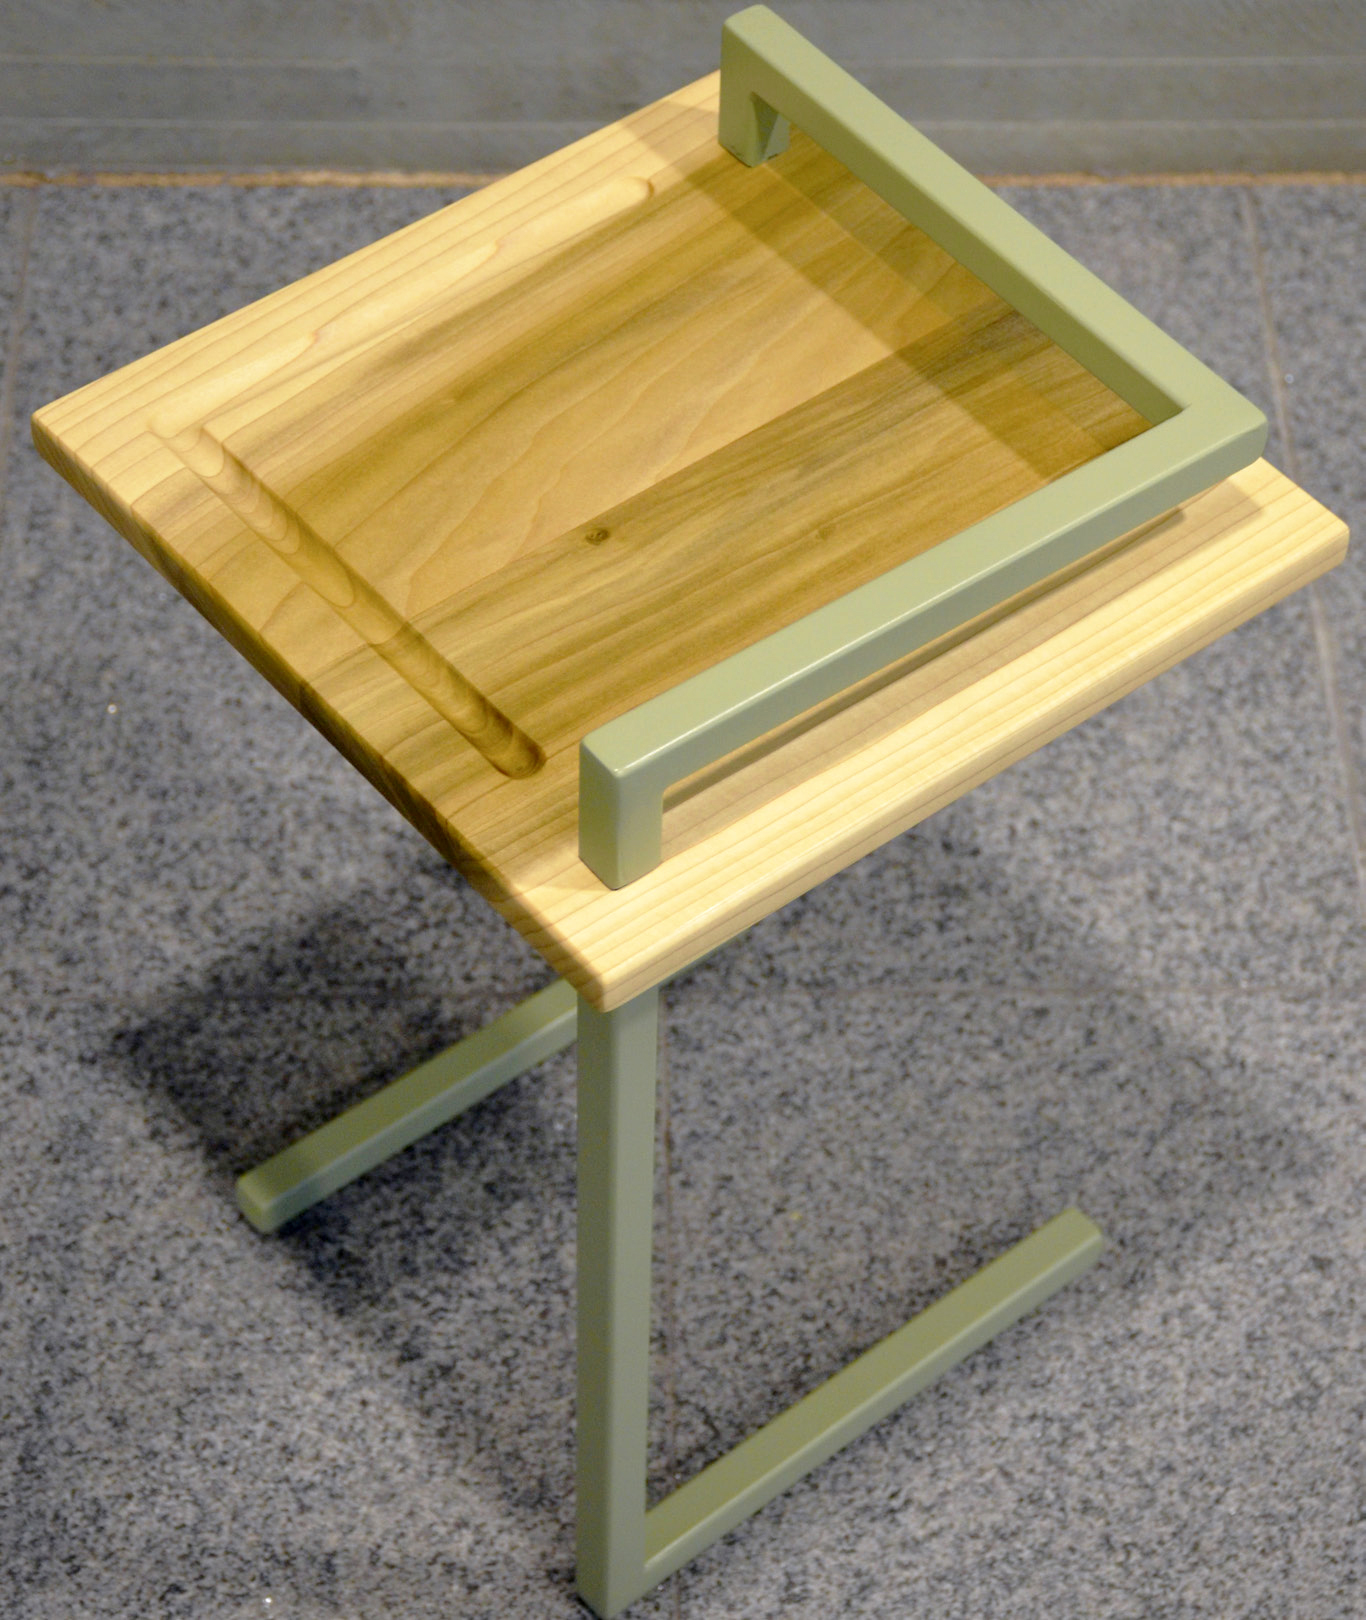 top view of portable table design